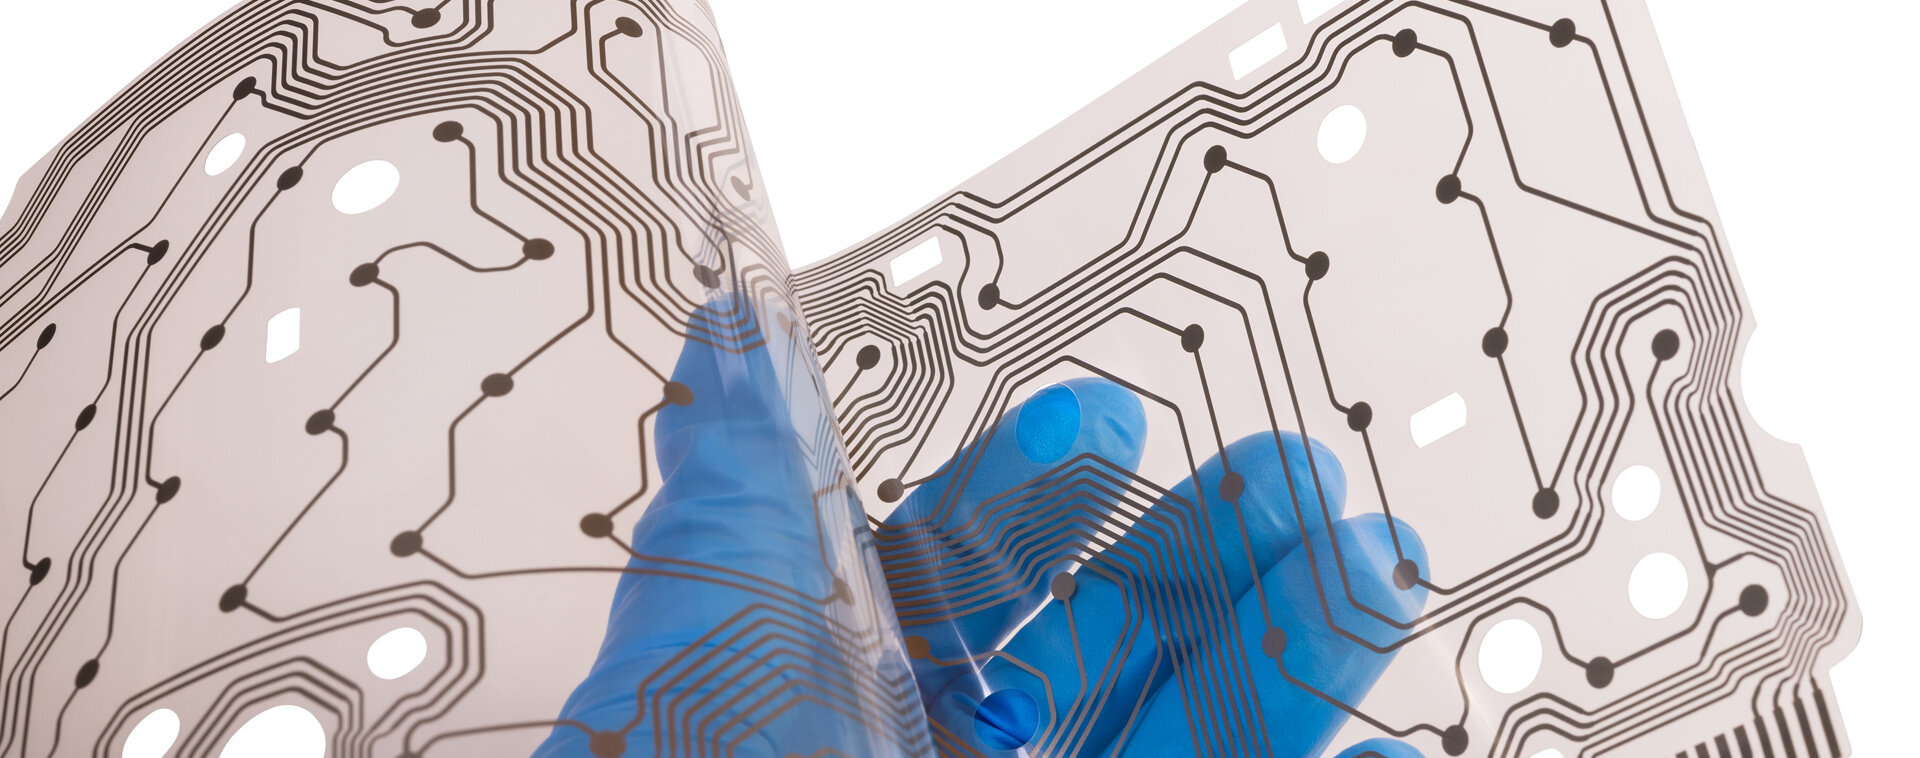 Printed electronics in application | © AdobeStock_290575617